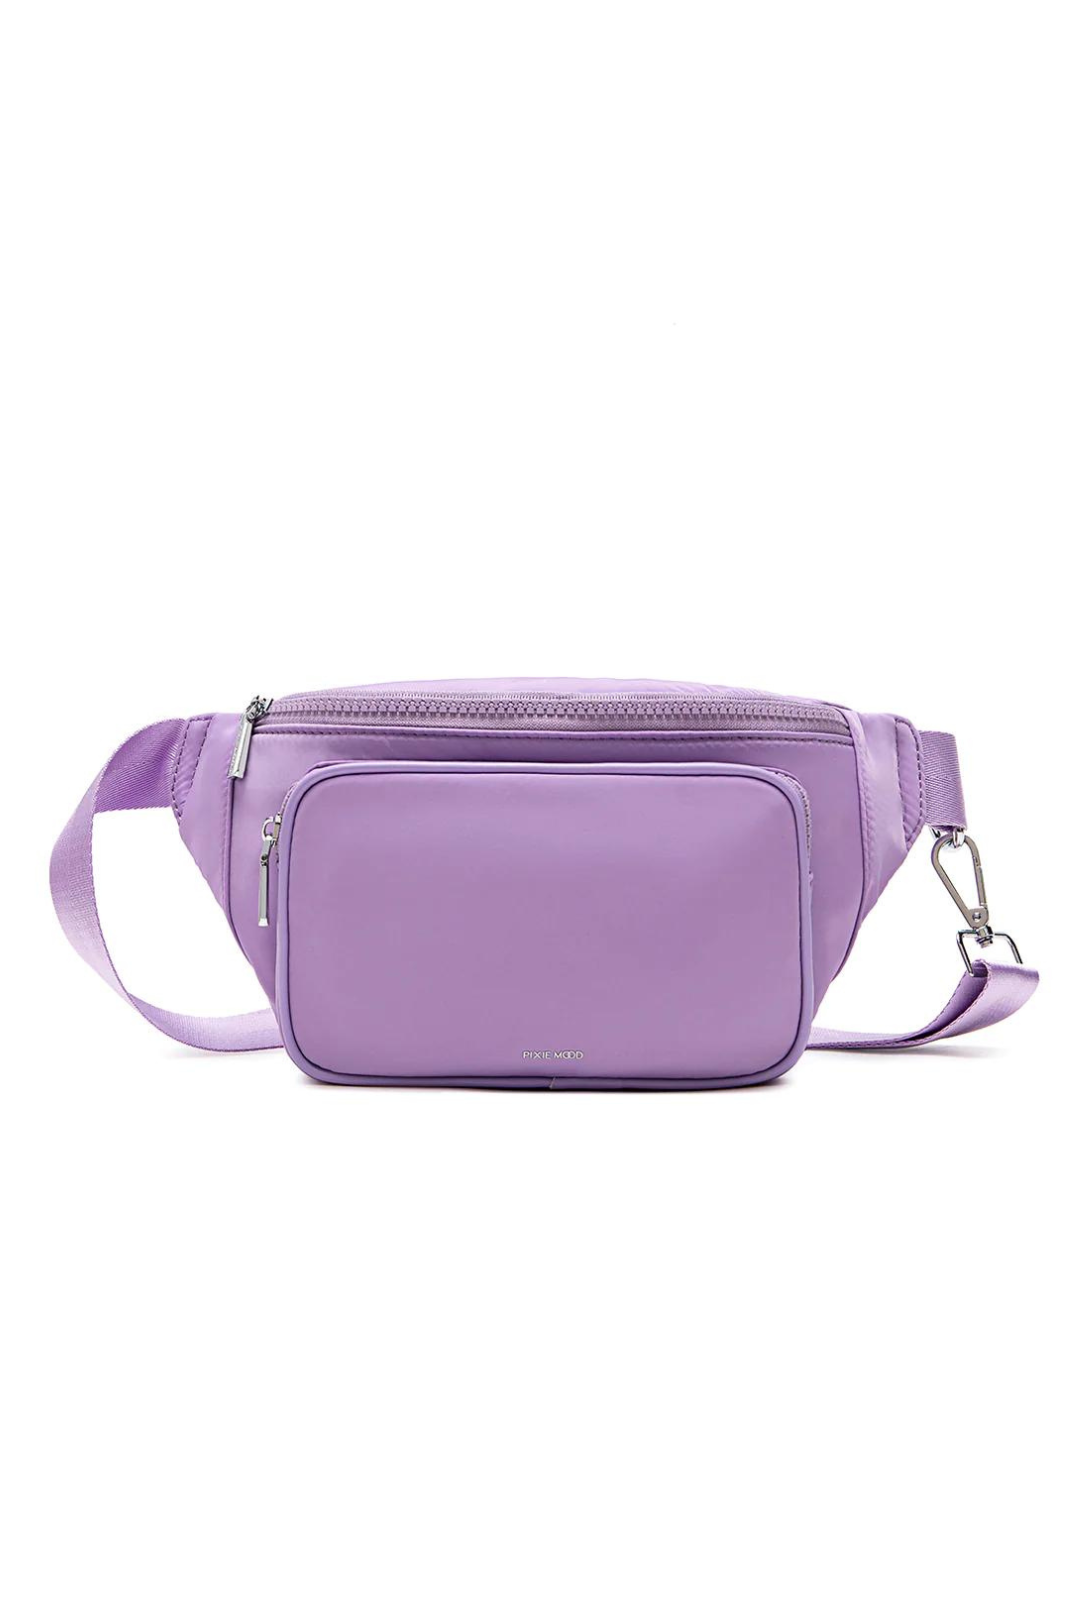 Pixie Mood Aaliyah Fanny Pack-Lavender Nylon. The Aaliyah Fanny Pack is the perfect companion for all your adventures! Its lightweight and sleek design makes it a great addition to any outfit - whether you're going for an athleisure, casual look or an edgy vibe. Plus, the exterior zip pocket allows for easy access to your essentials.